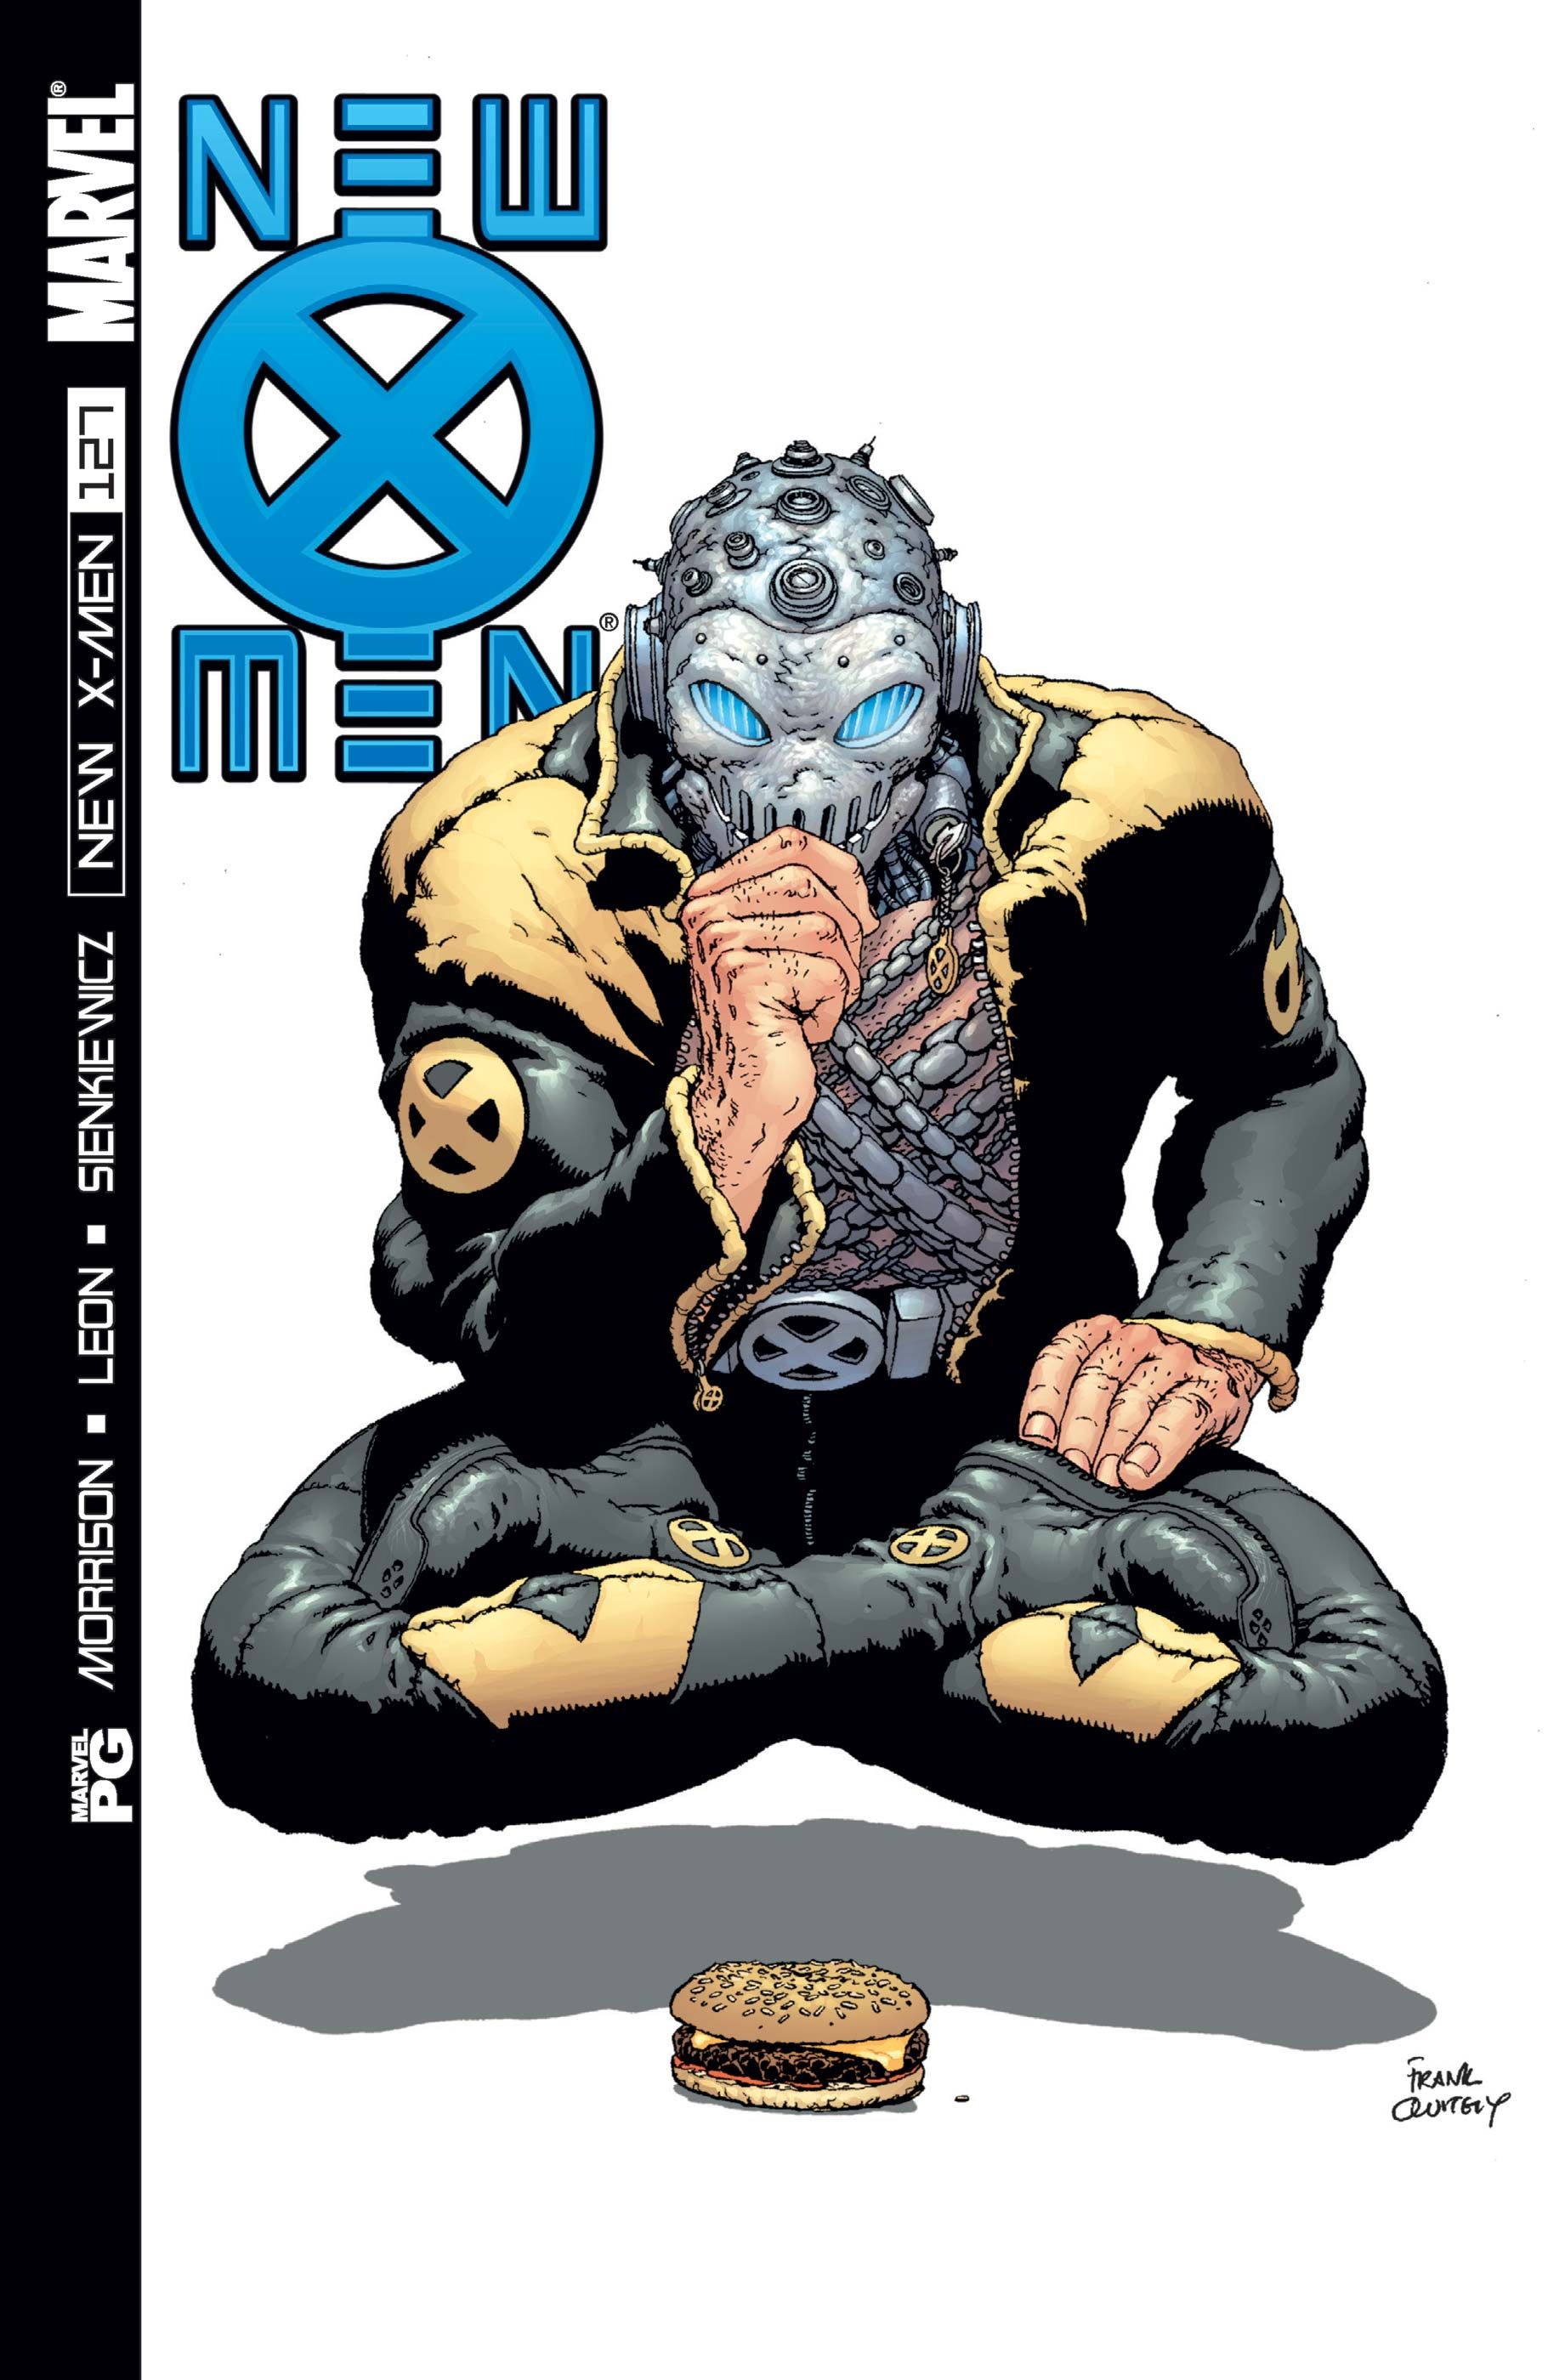 The cover of New X-Men #127